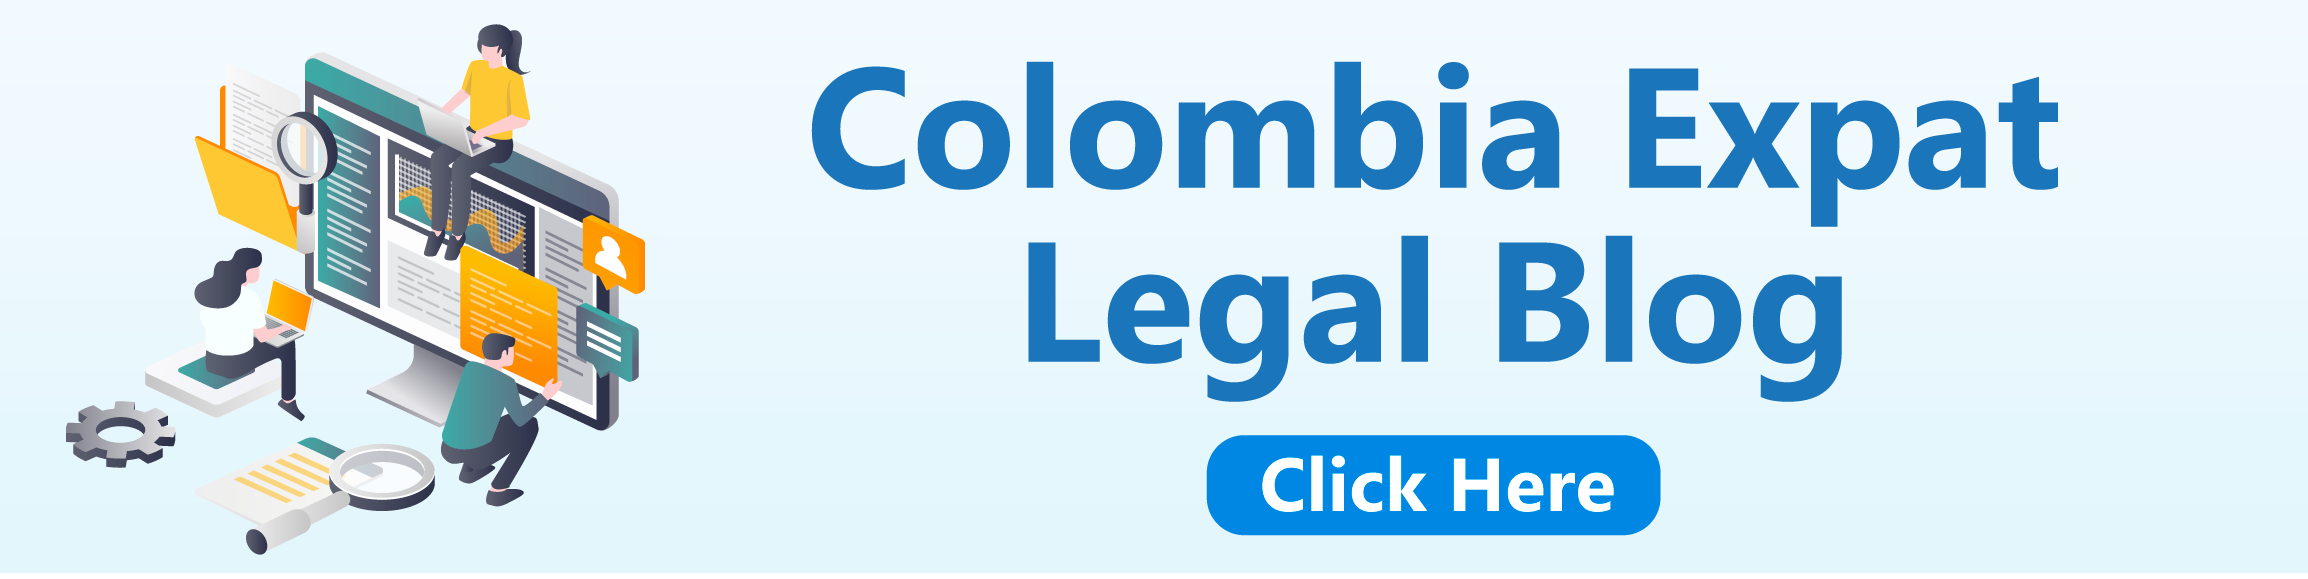 Colombia-Expat-Legal-Blog